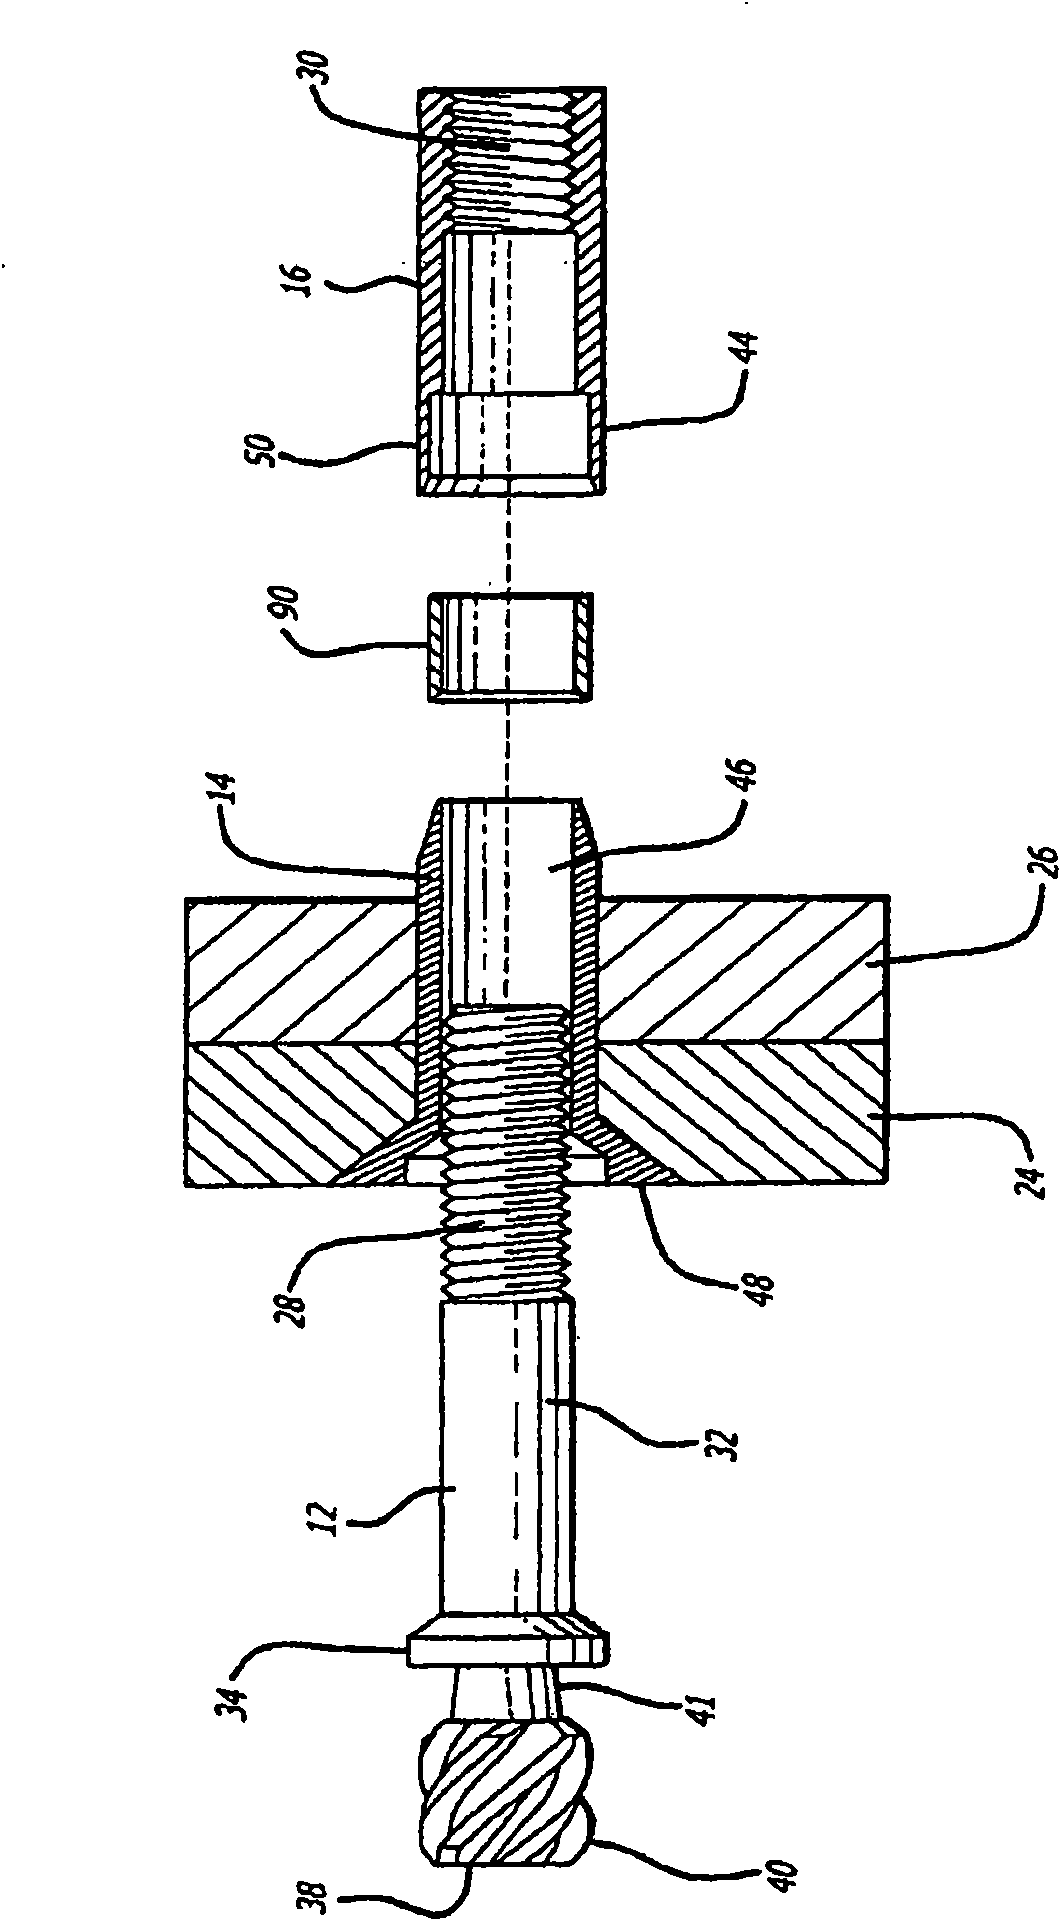 Blind fastener and nose assembly for installation thereof